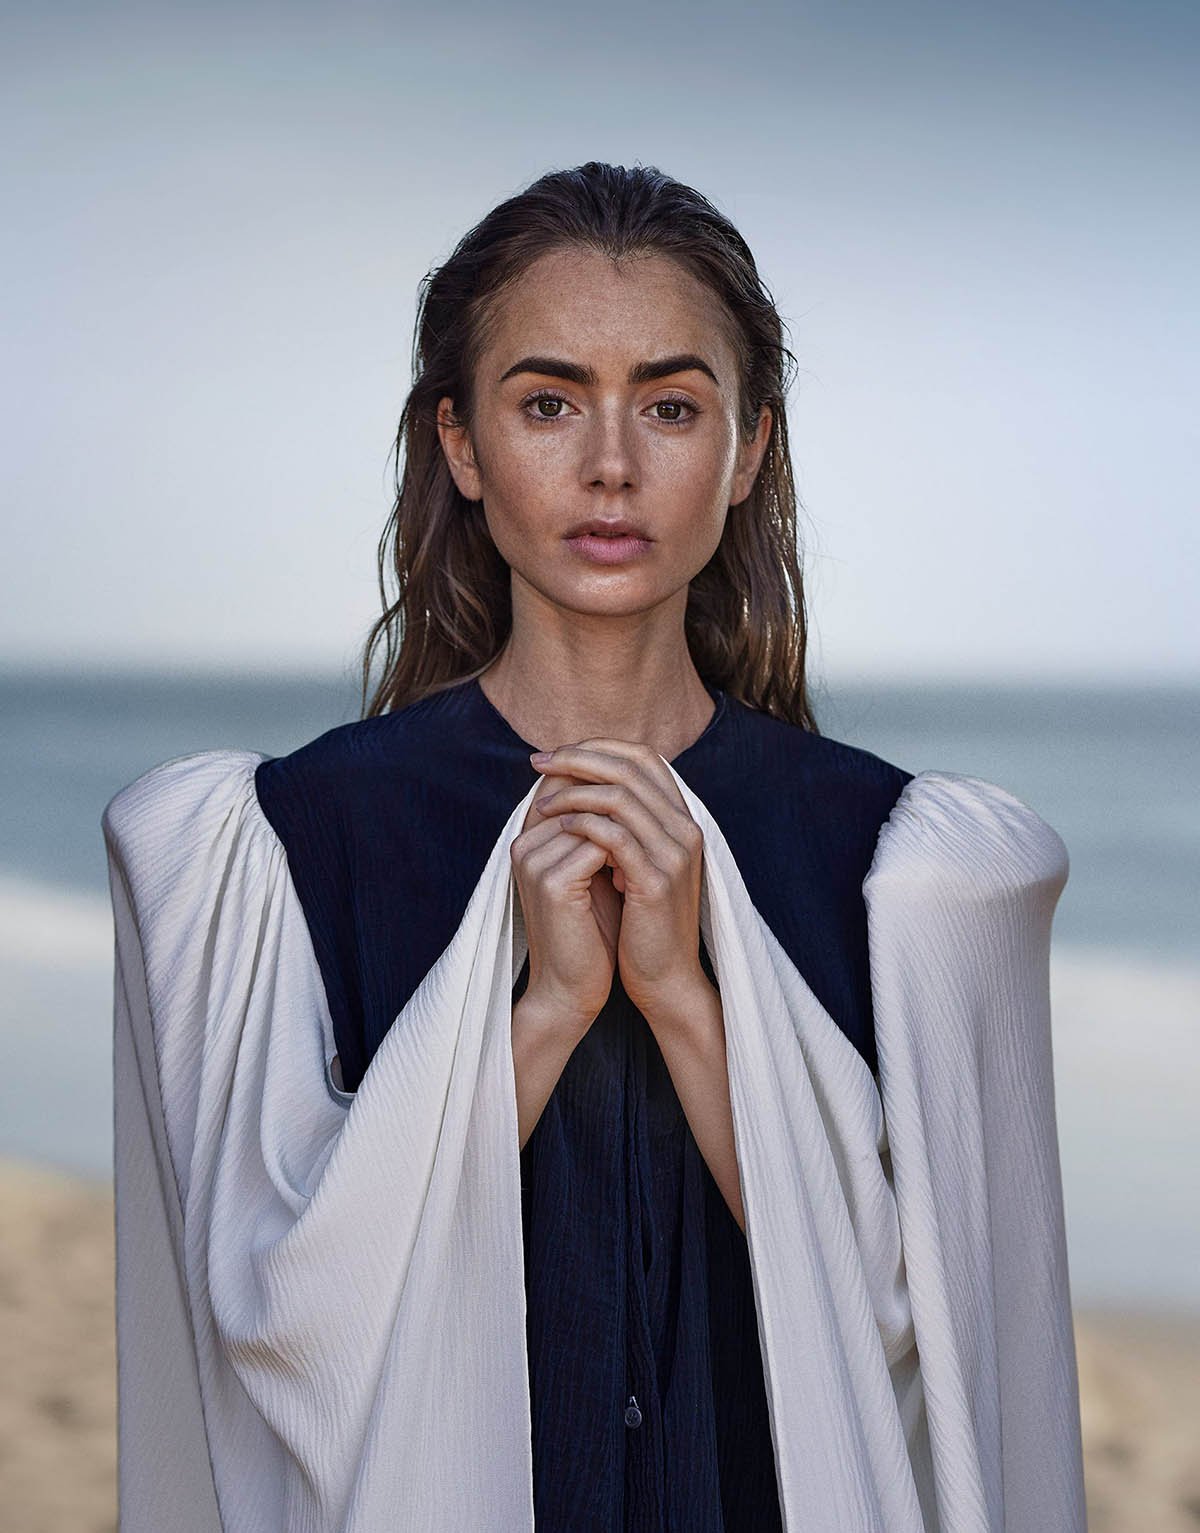 Lily-Collins-covers-LOfficiel-Global-Winter-2020-by-Sam-Taylor-Johnson-11.jpg